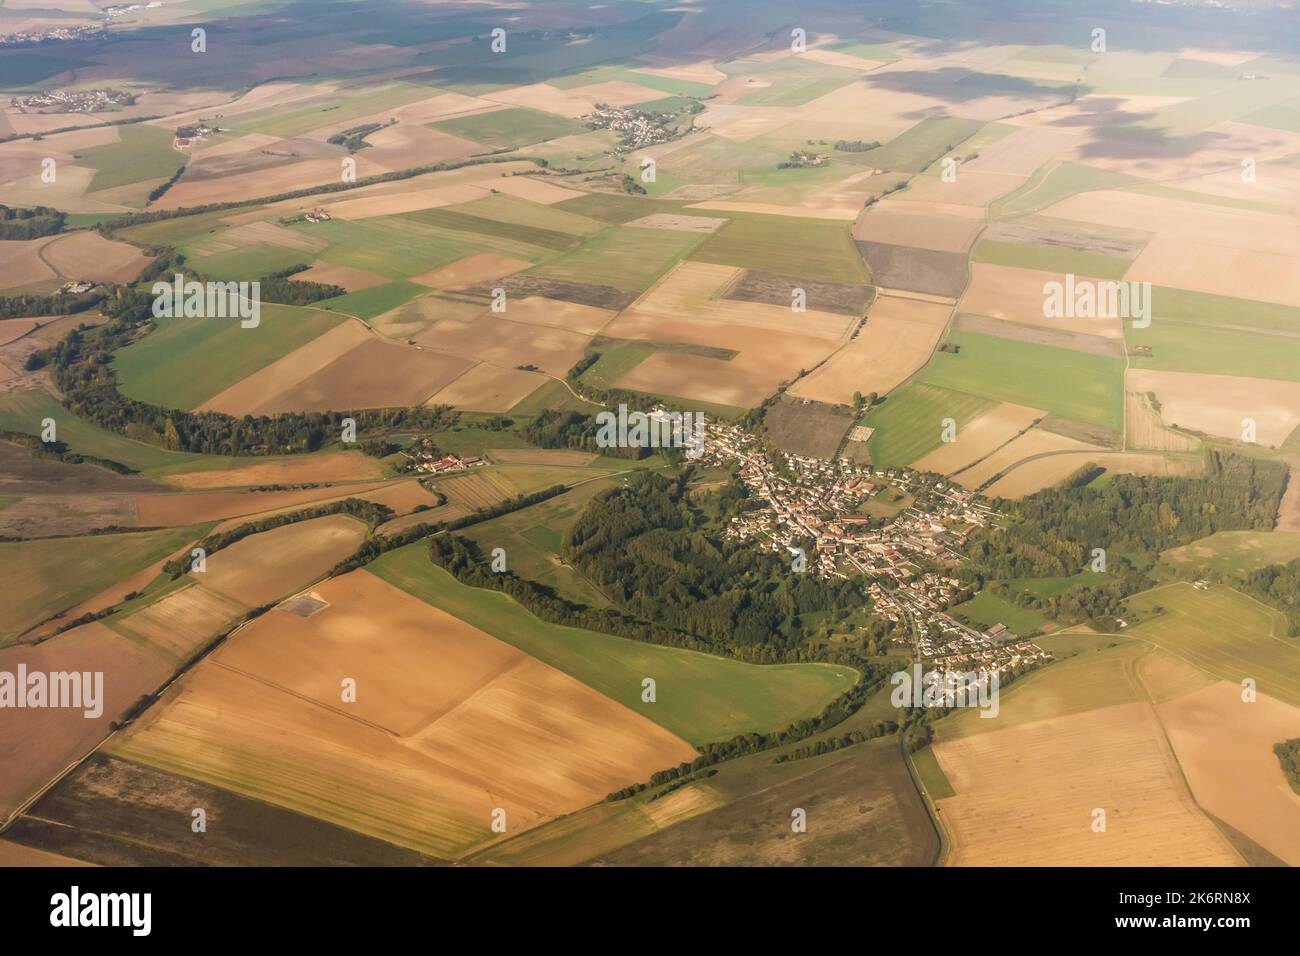 Aerial view of French countryside with village, farms and fields Stock Photo